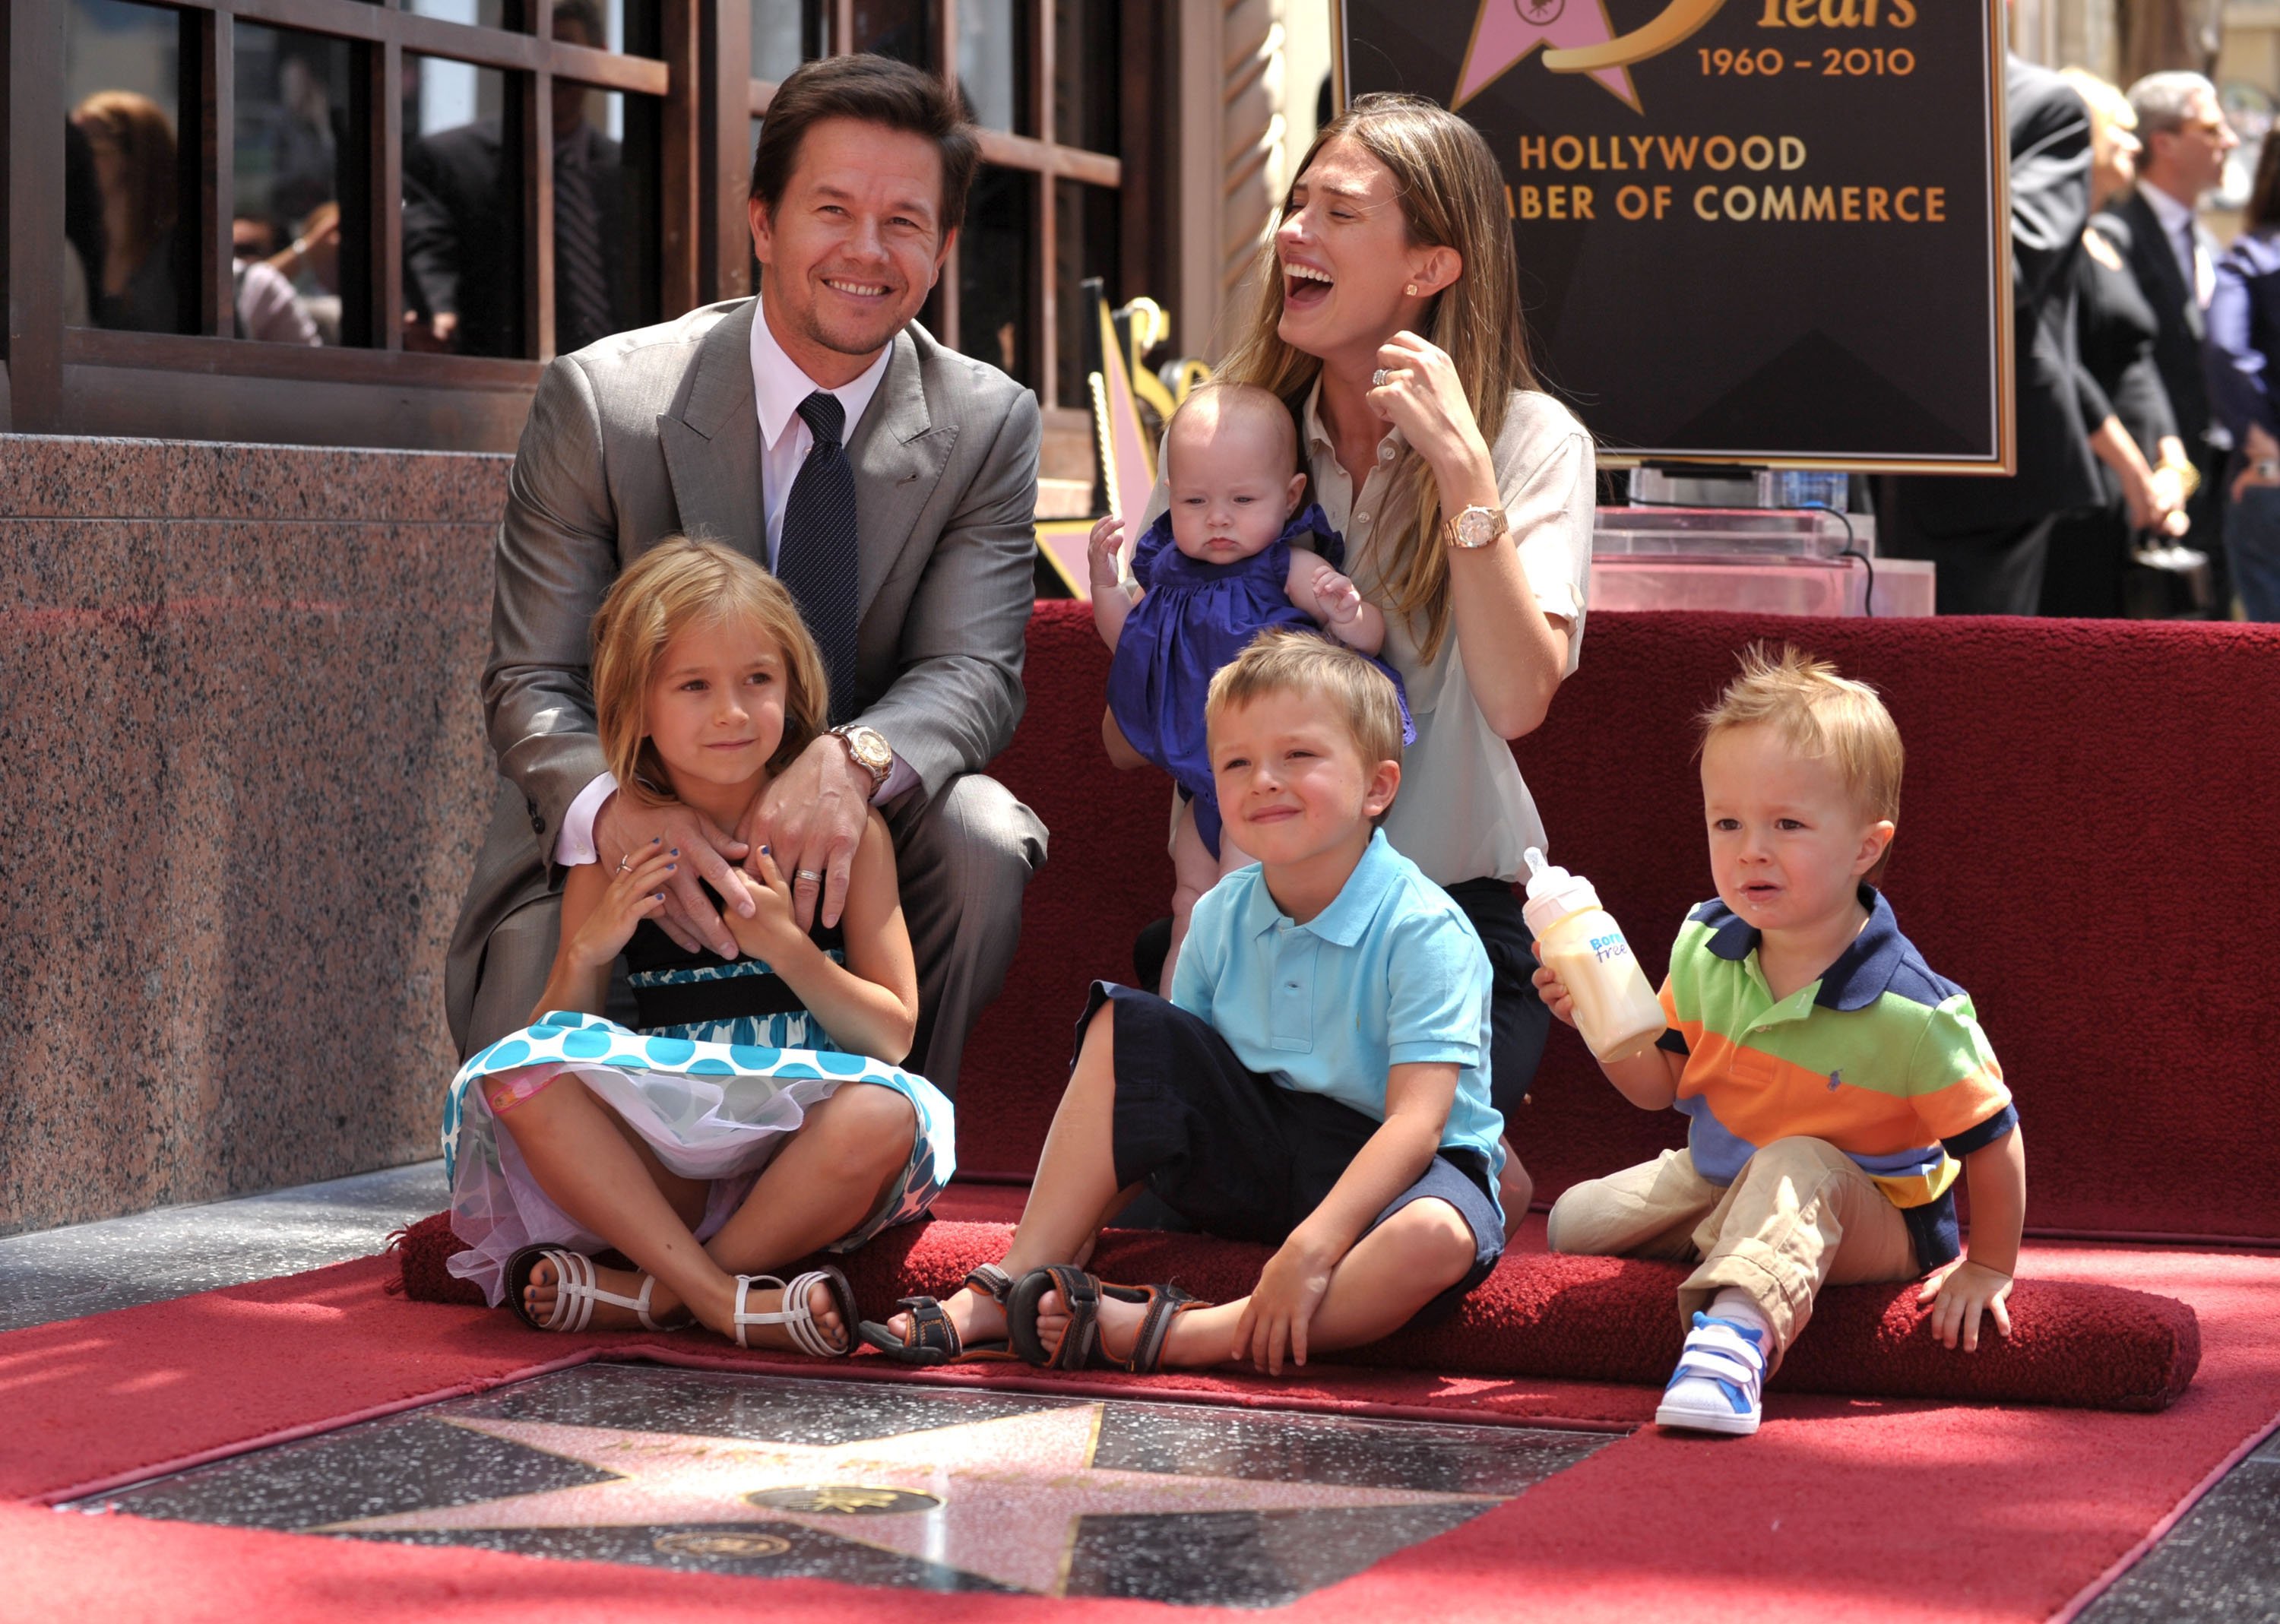 Actor Mark Wahlberg and wife Rhea Durham with their children Ella, Michael, Brendan, and Grace attend Wahlberg's Hollywood Walk of Fame Star Ceremony on July 29, 2010 in Hollywood, California. | Source: Getty Images